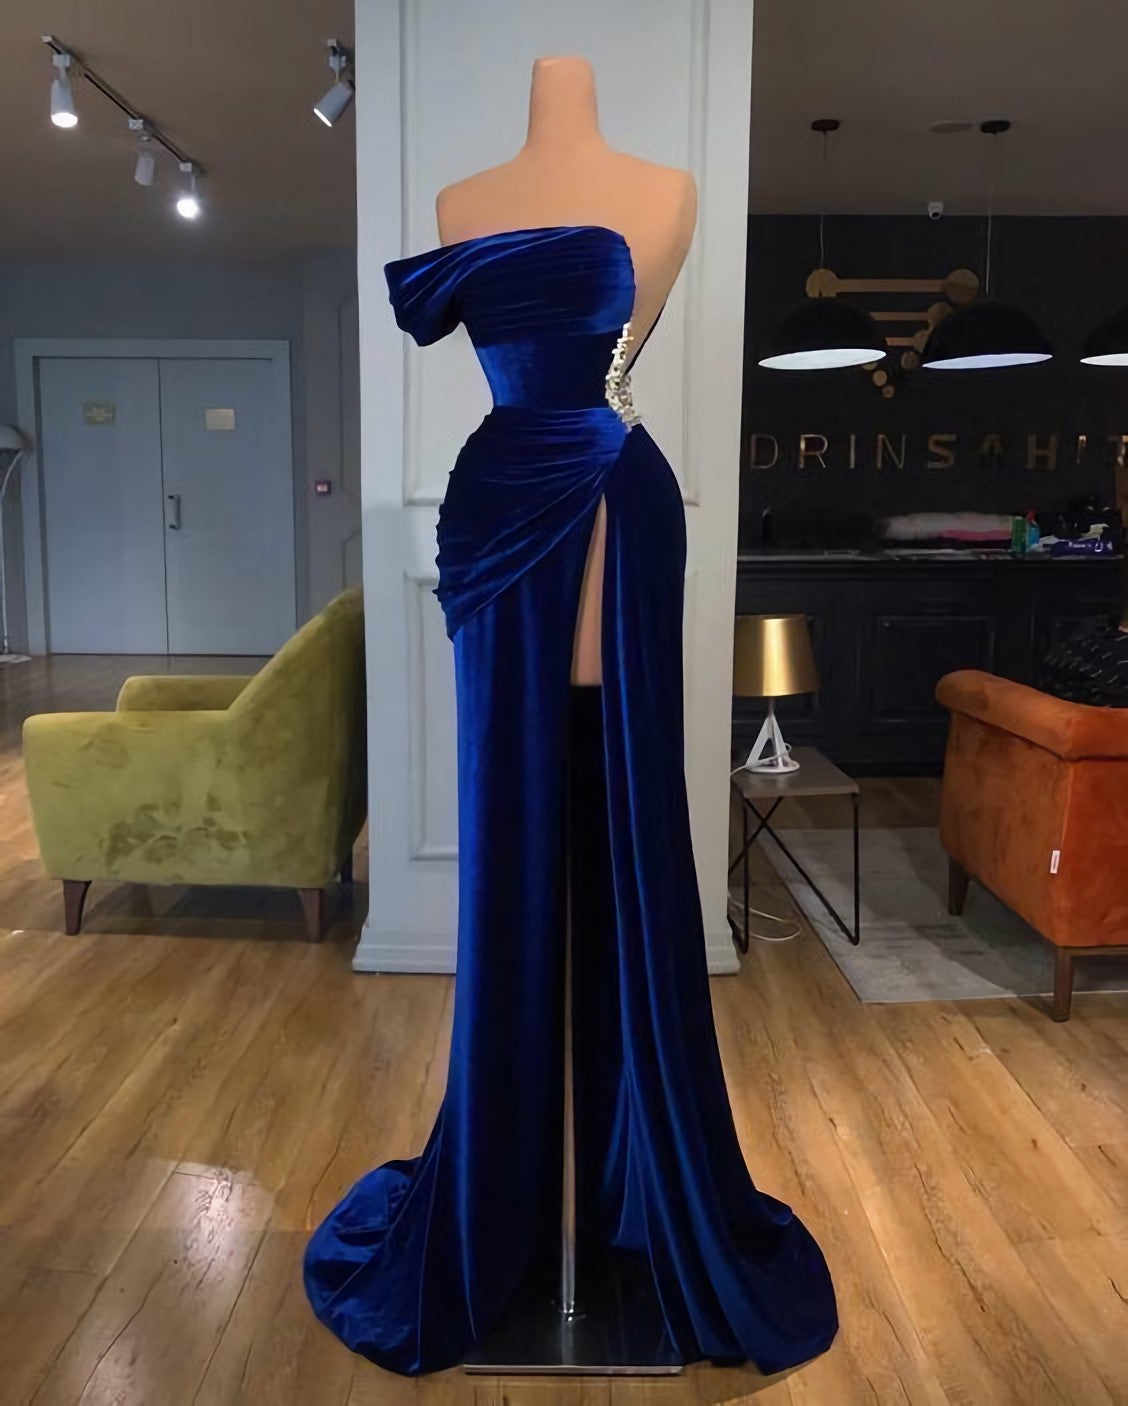 Party Outfit, One Shoulder Royal Blue Velvet Evening Prom Dress, With Slit